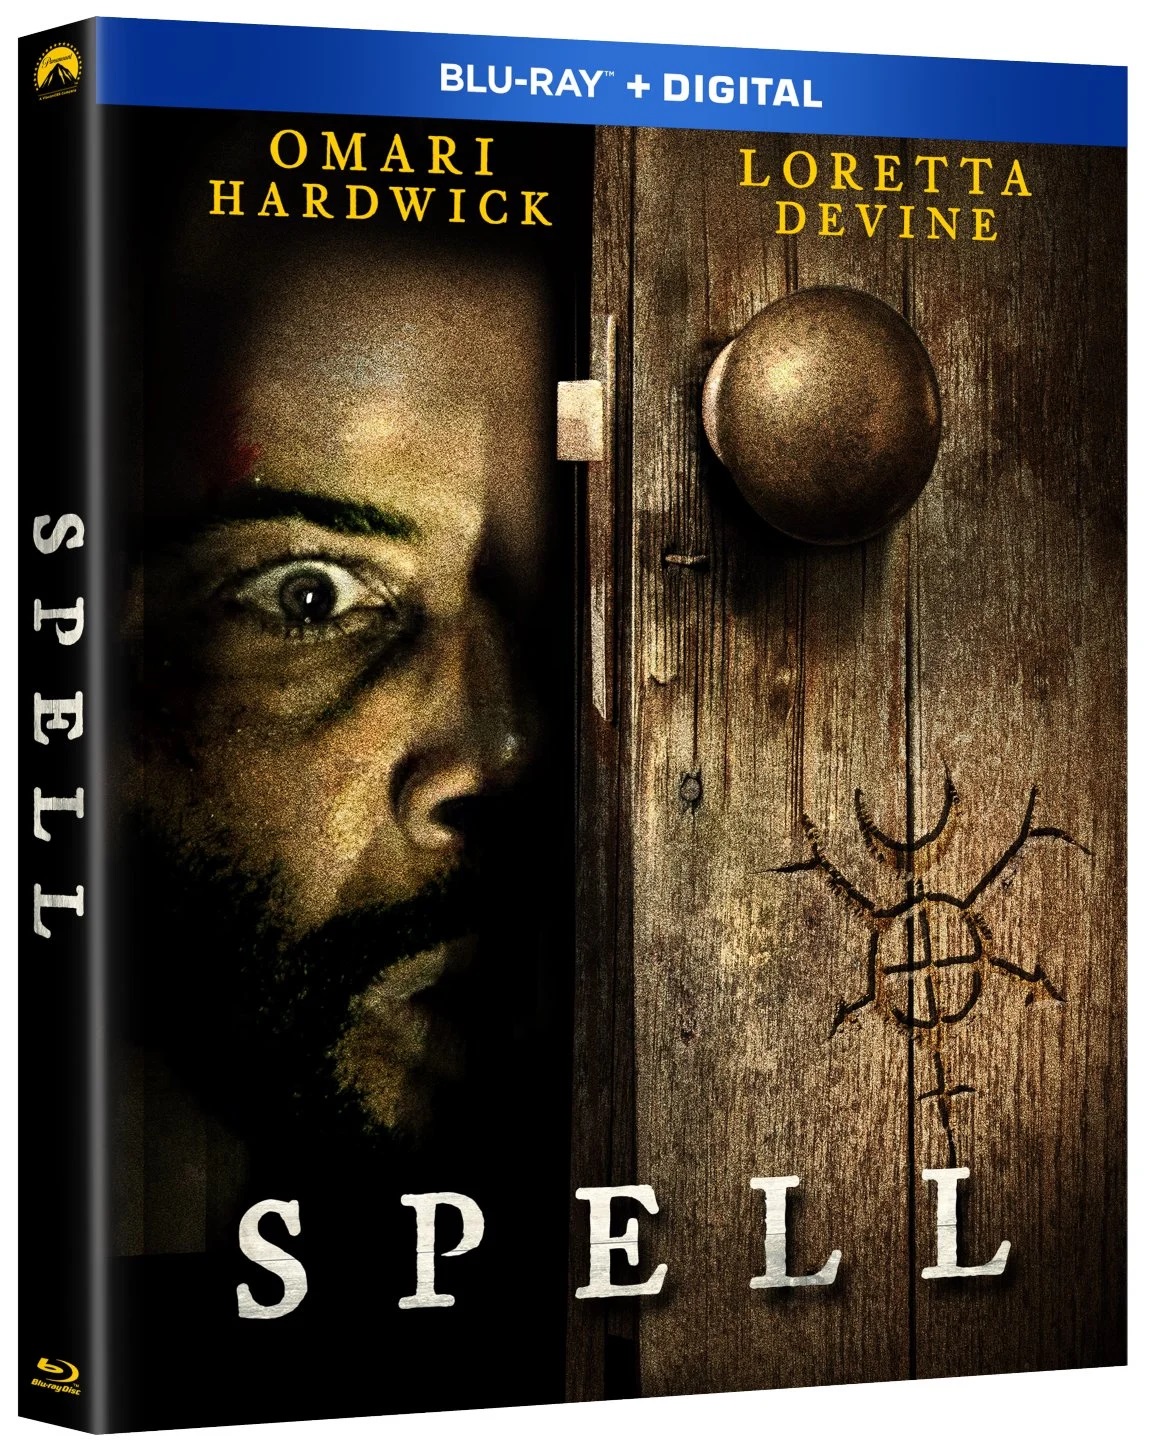 Spell Blu-ray Review (Paramount Pictures) - Cultsploitation | Cult